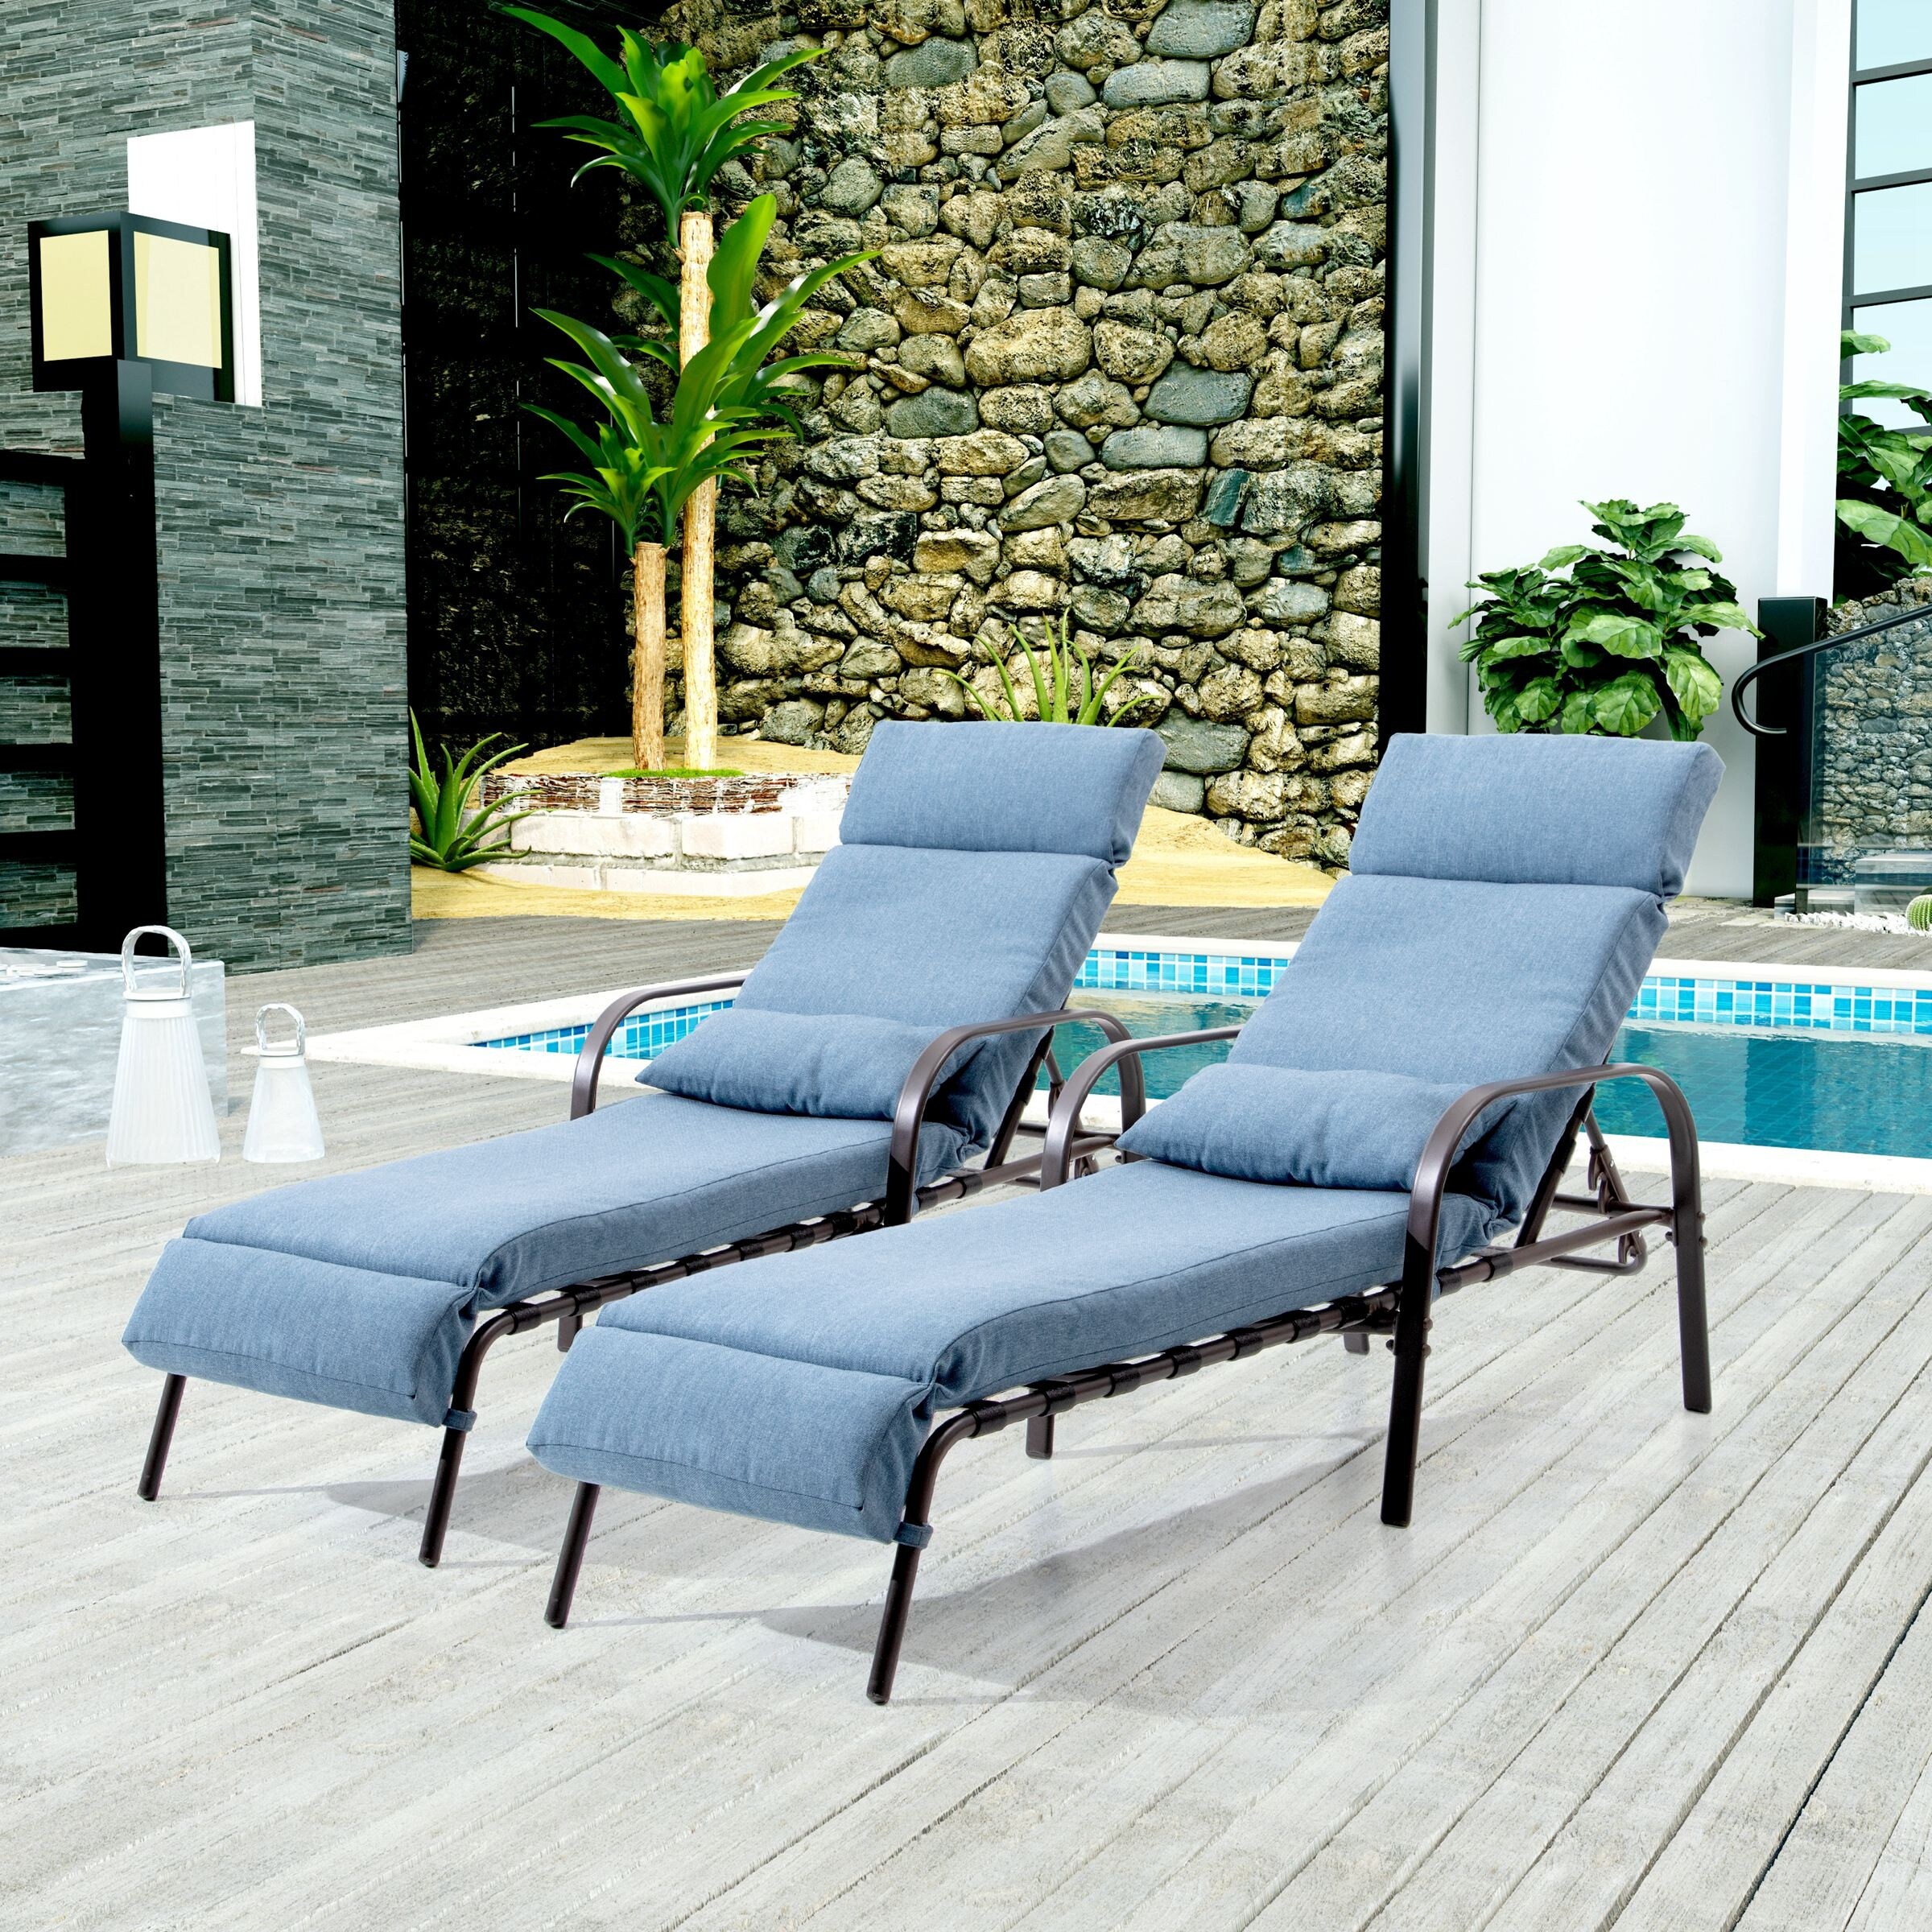 Pellebant 2pcs Adjustable Patio Chaise Lounge With Cushion And Pillow - N/a